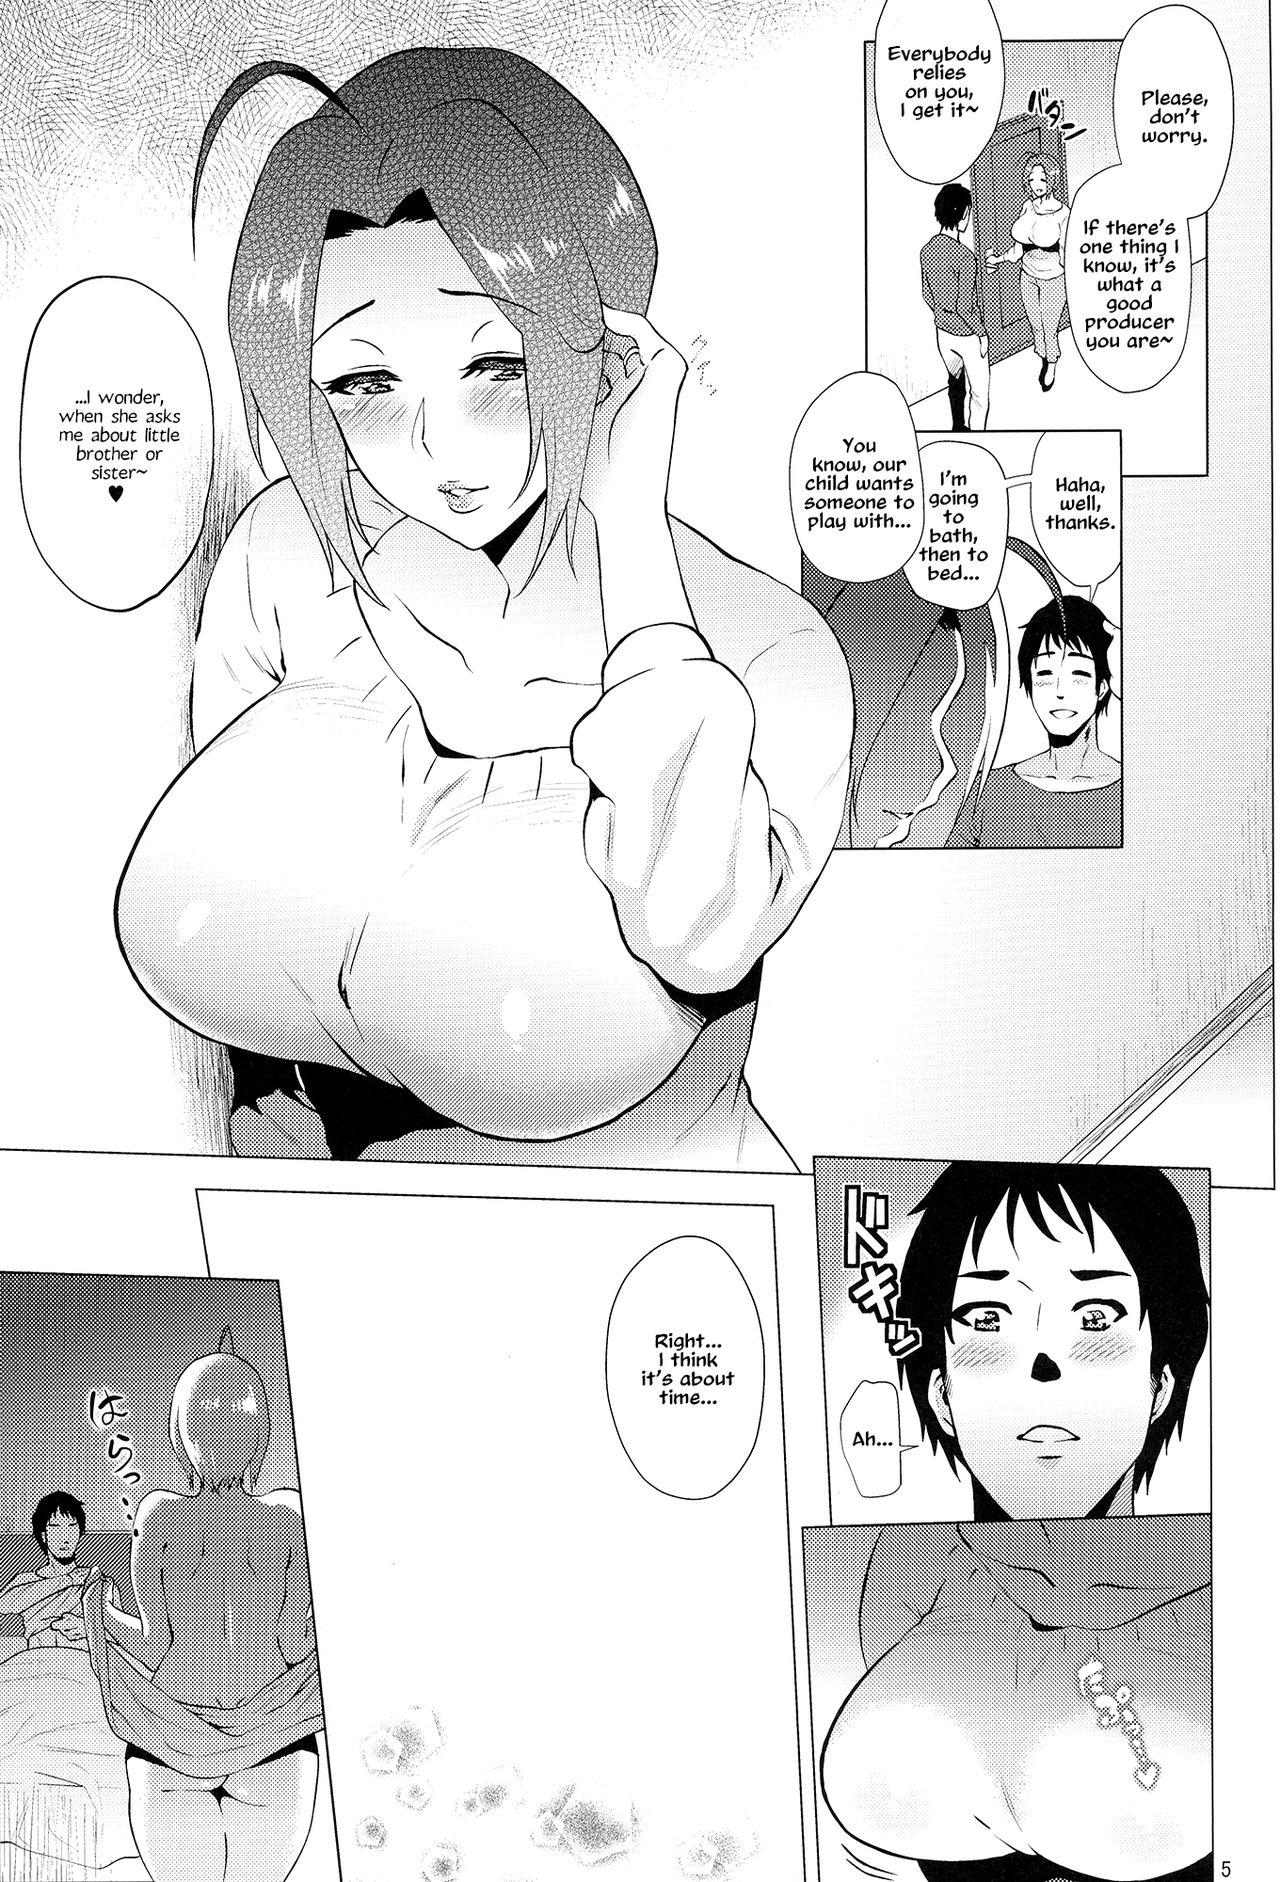 Sislovesme Itsumademo Anata to. | Forever Together - The idolmaster Asses - Page 5